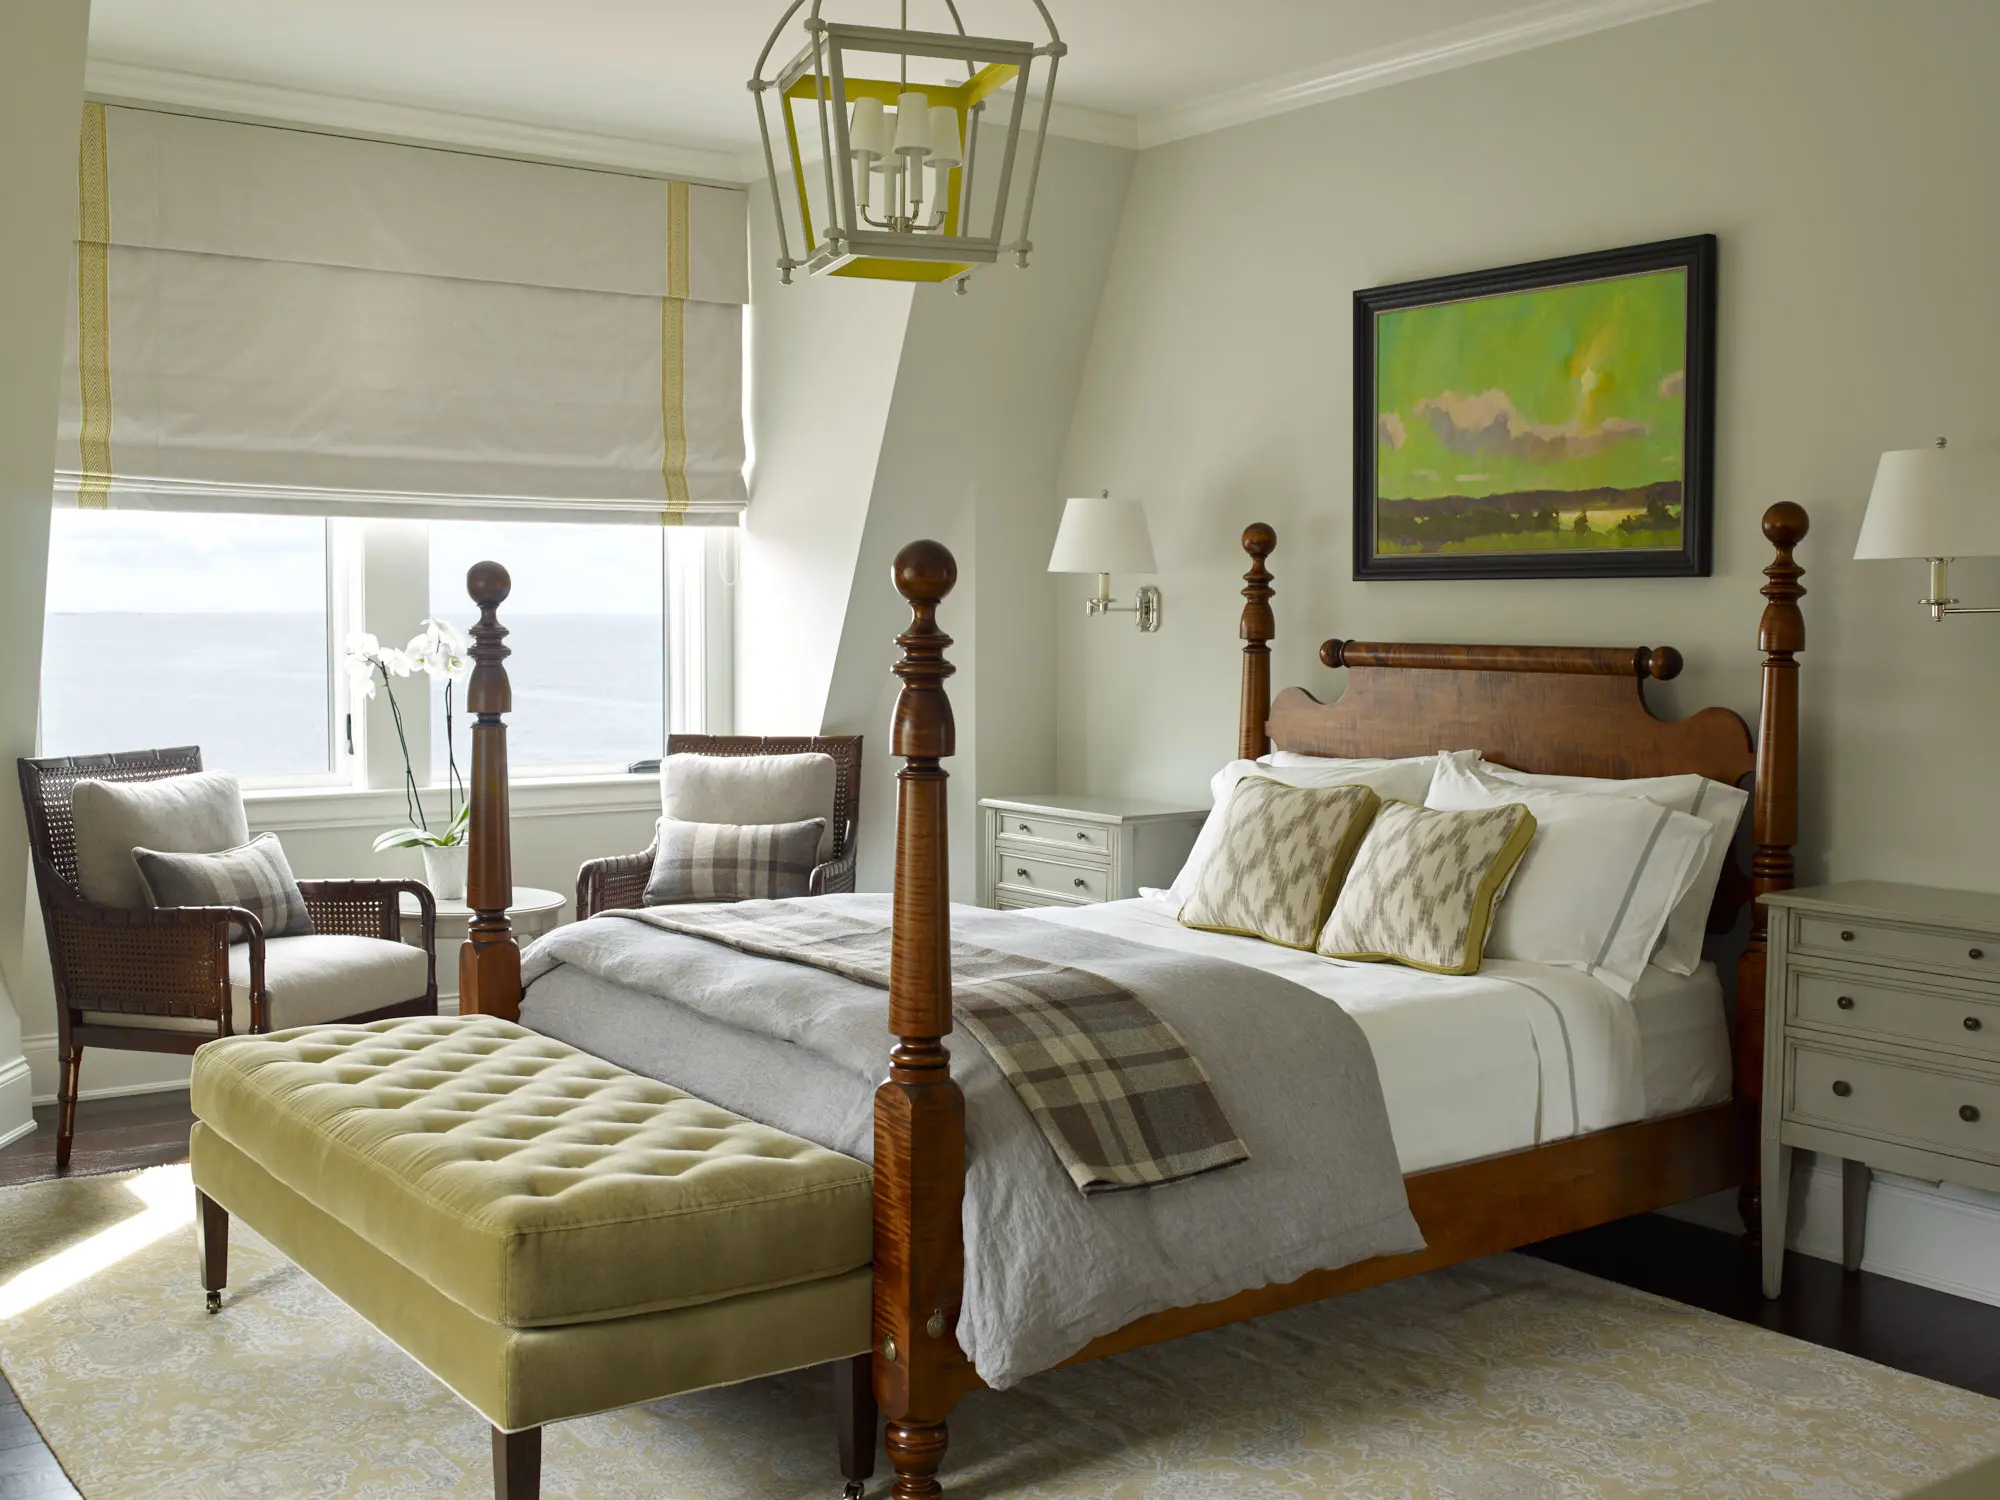 Cozy bedroom with yellow accents, sitting areas, and large windows.